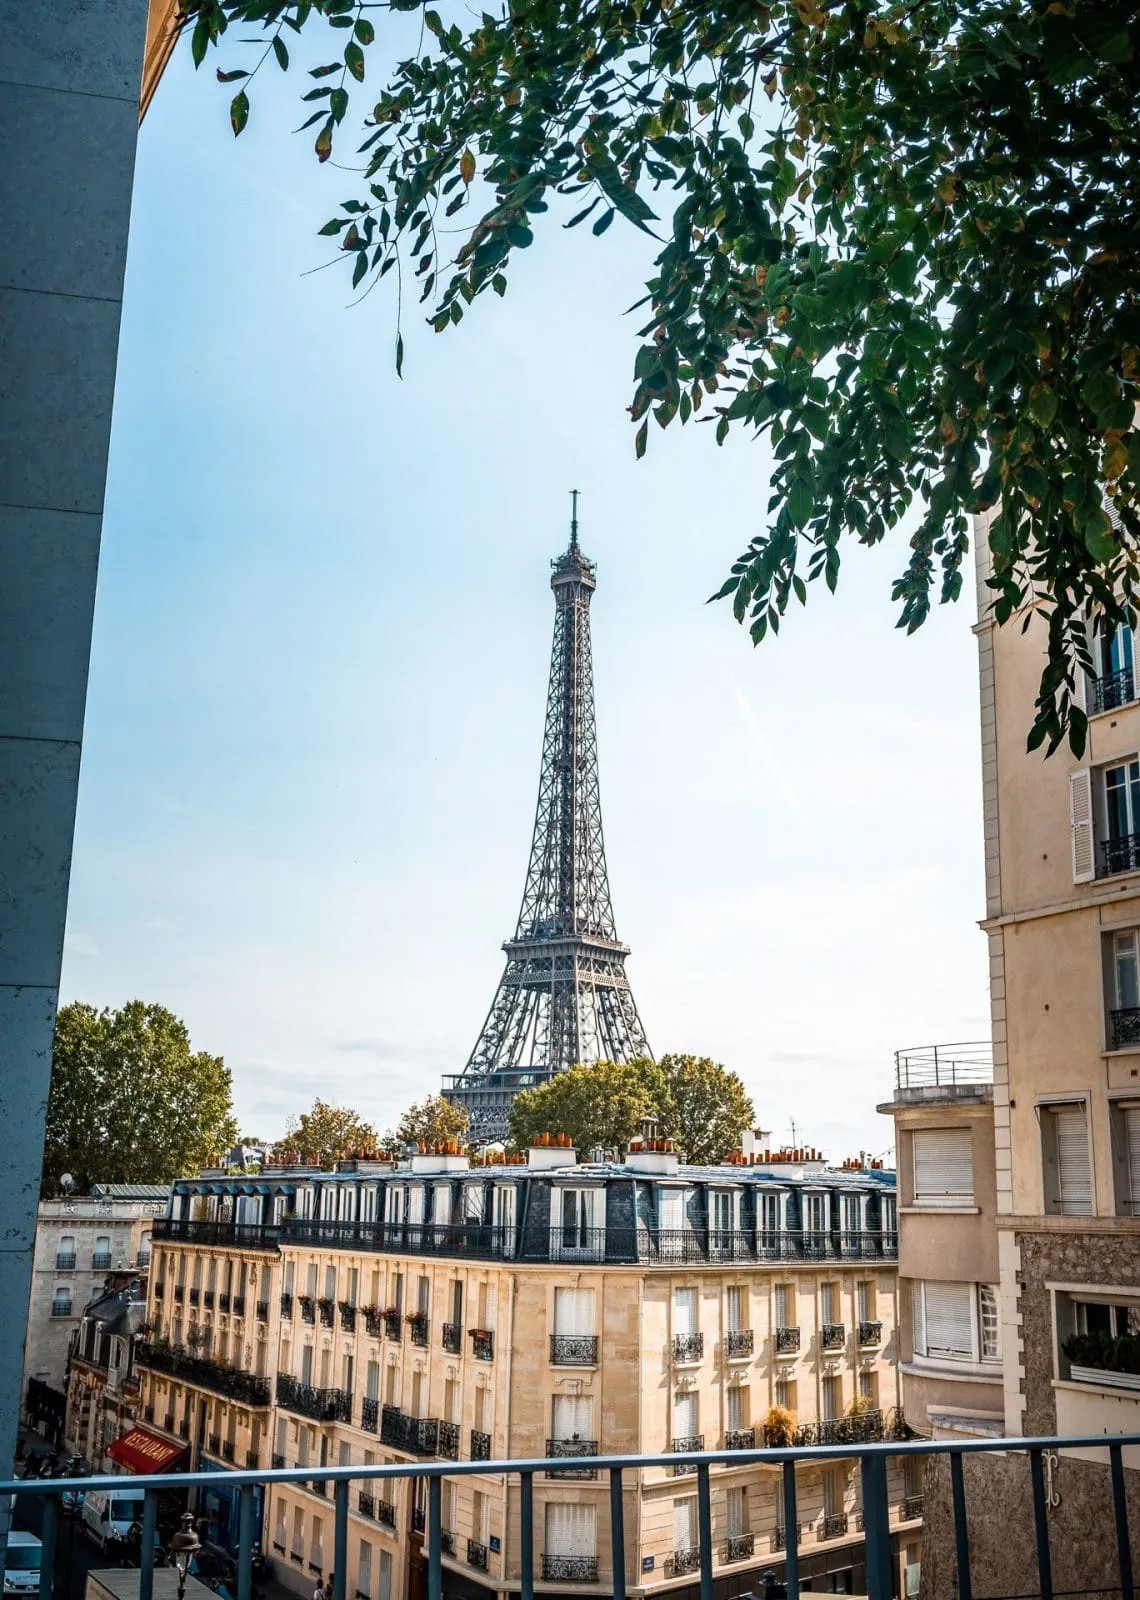 Top Paris Hotels With Eiffel Tower Views: 10 Top Choices!